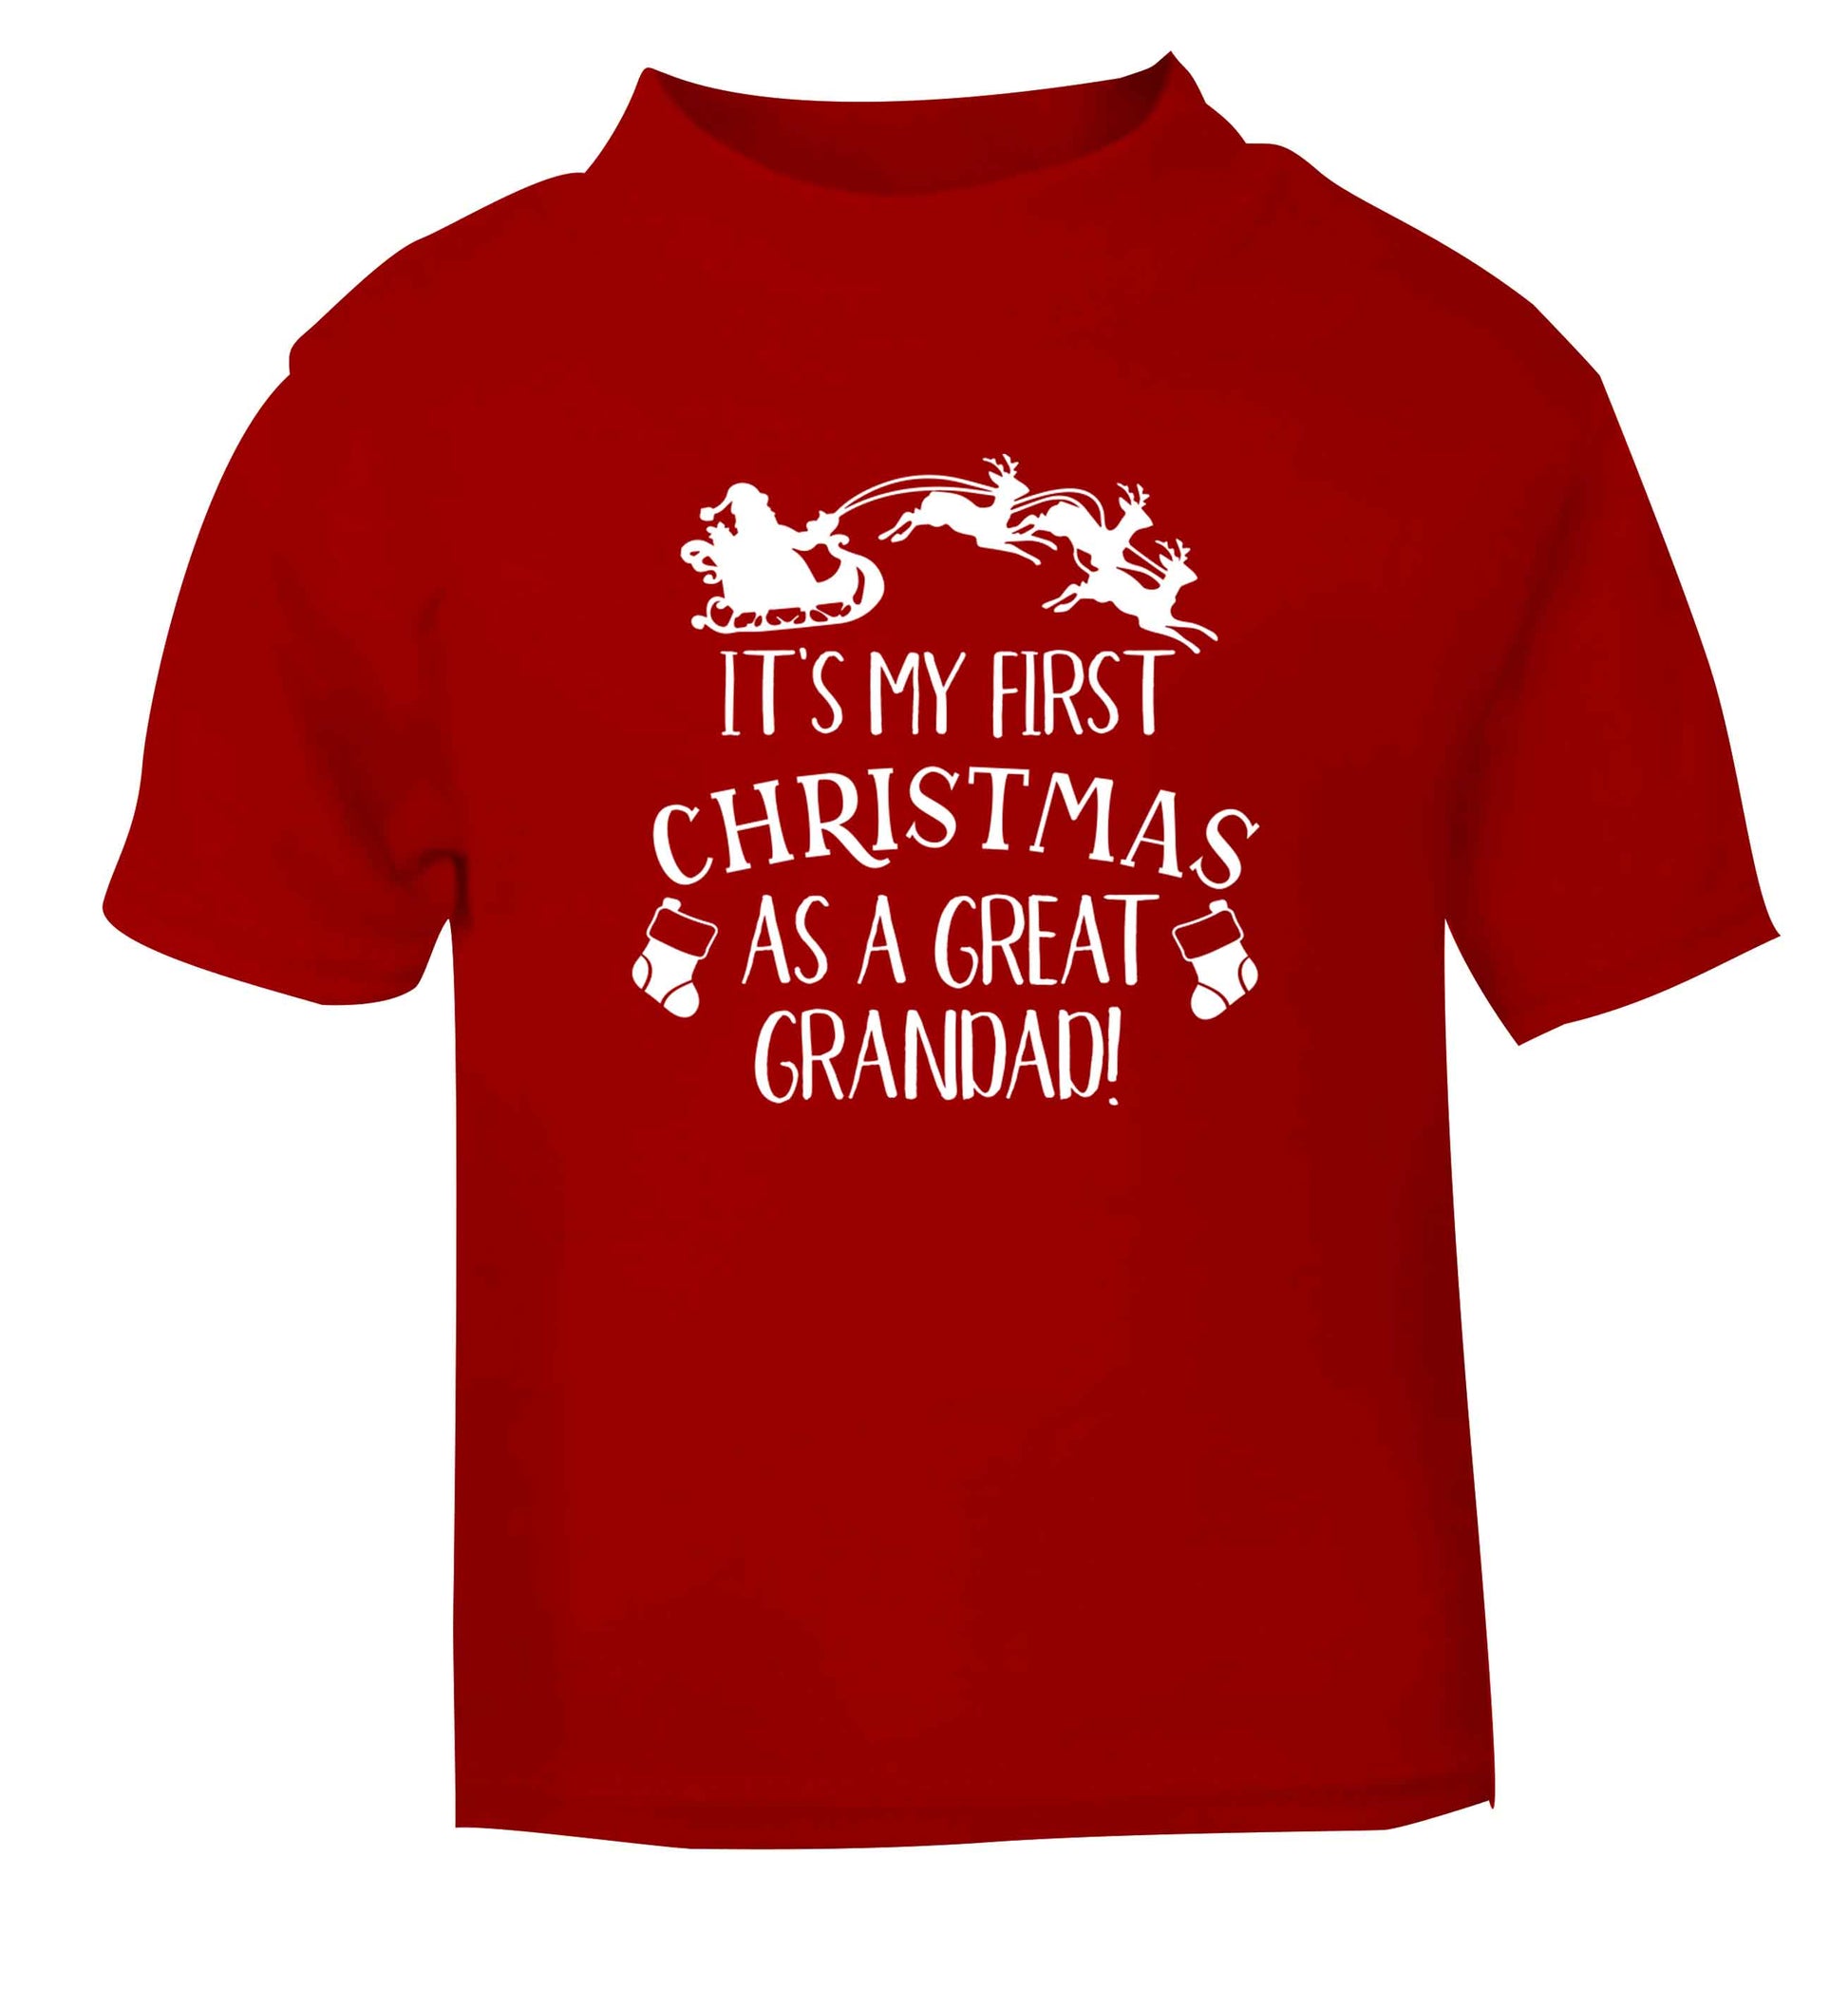 It's my first Christmas as a great grandad! red Baby Toddler Tshirt 2 Years